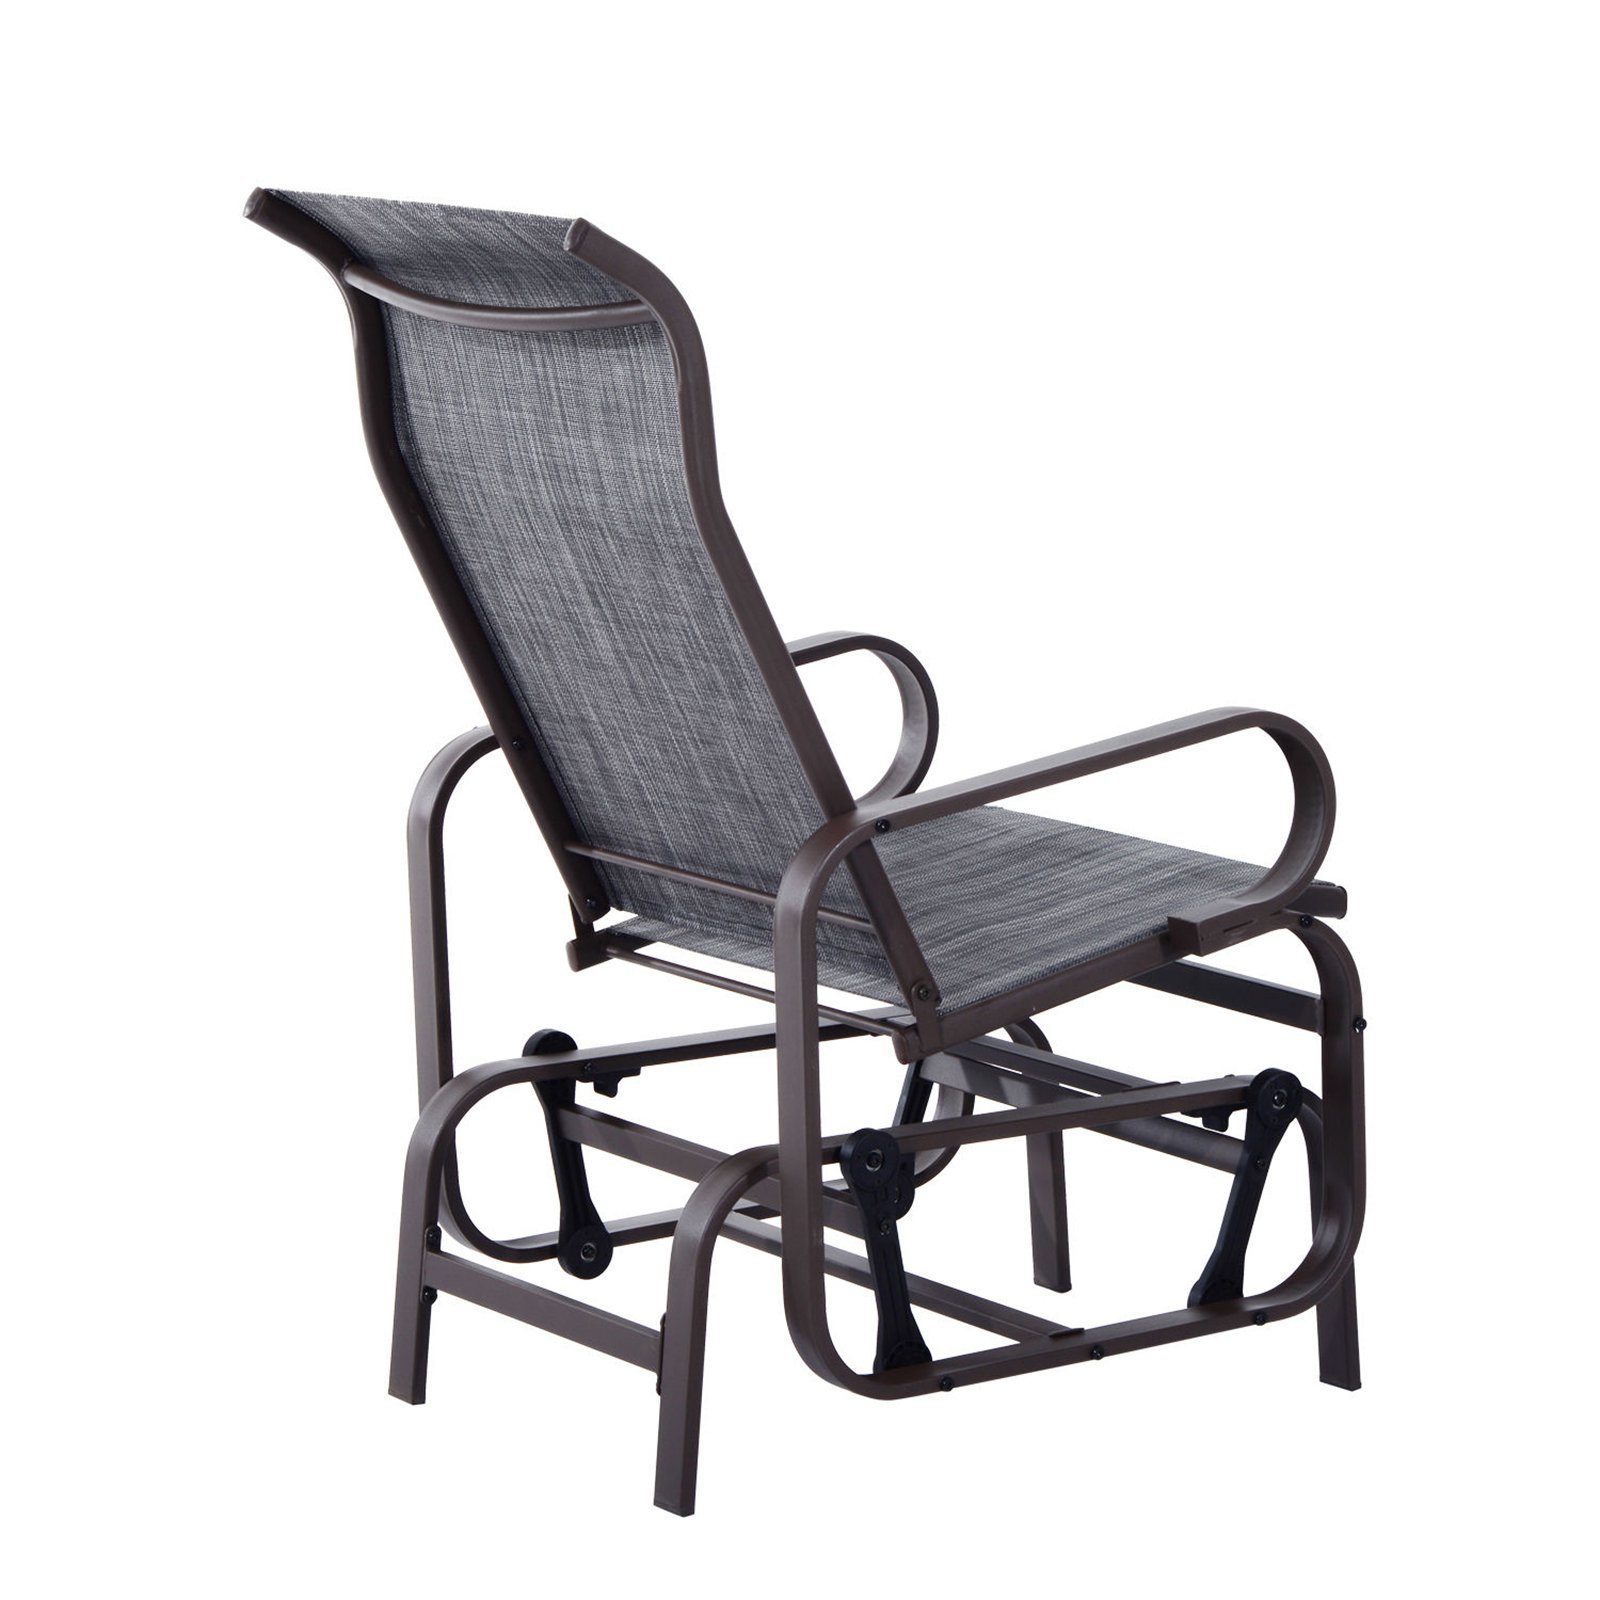 Outsunny Gliding Lounger Chair with Lightweight Construction, Gray - image 4 of 6